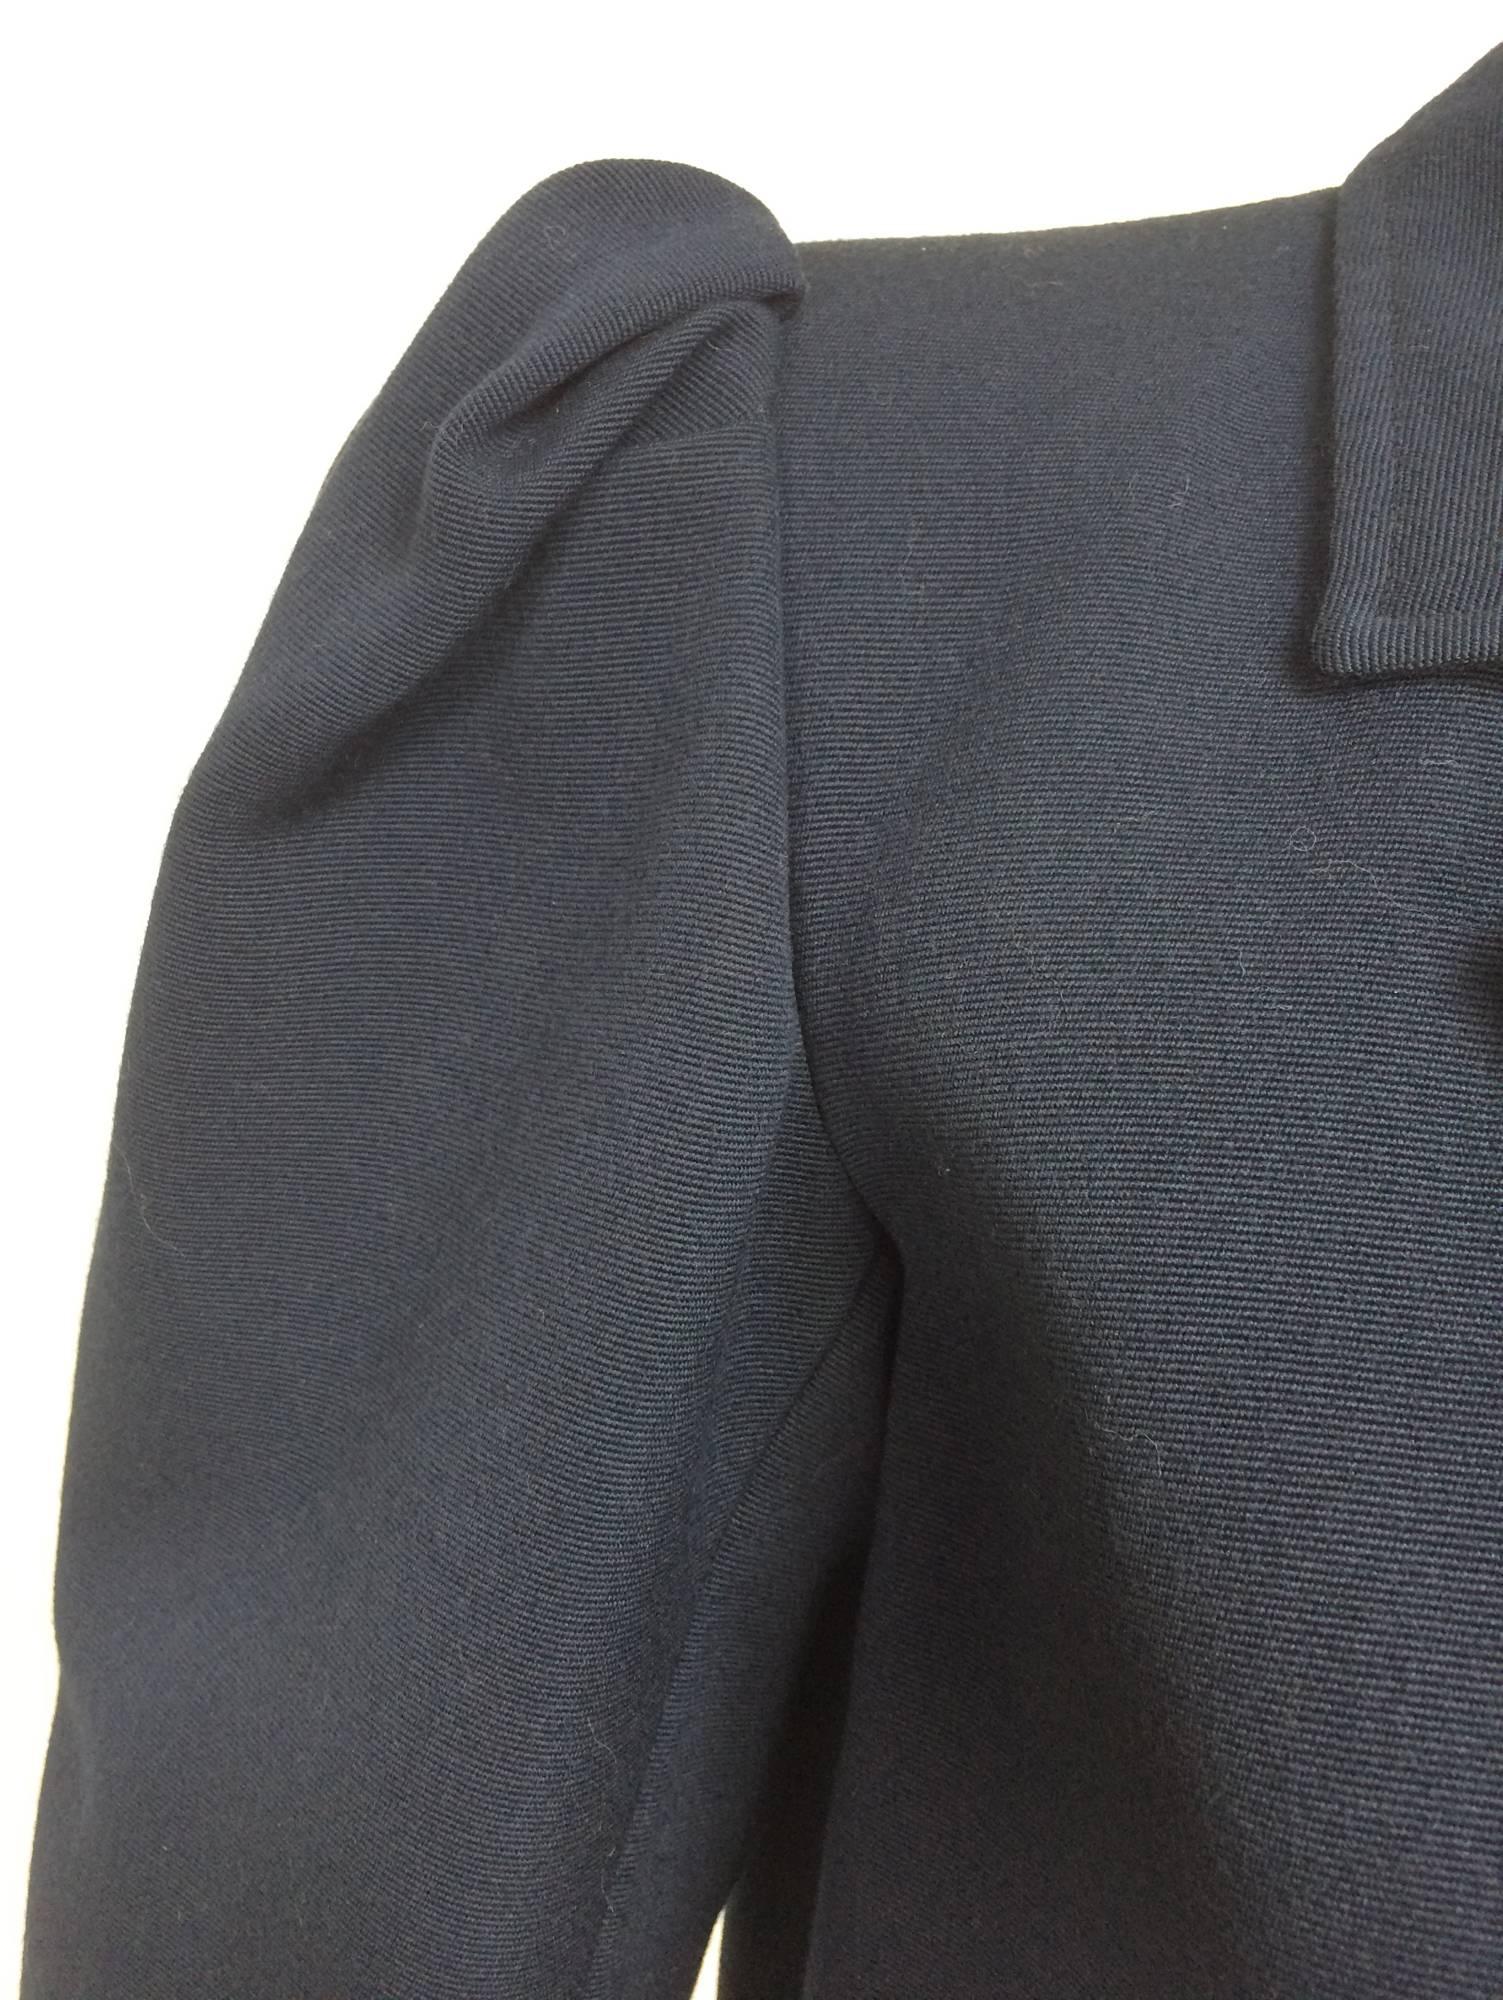 Yves St Laurent navy blue peaked shoulder cropped wool faille jacket 1980s 1